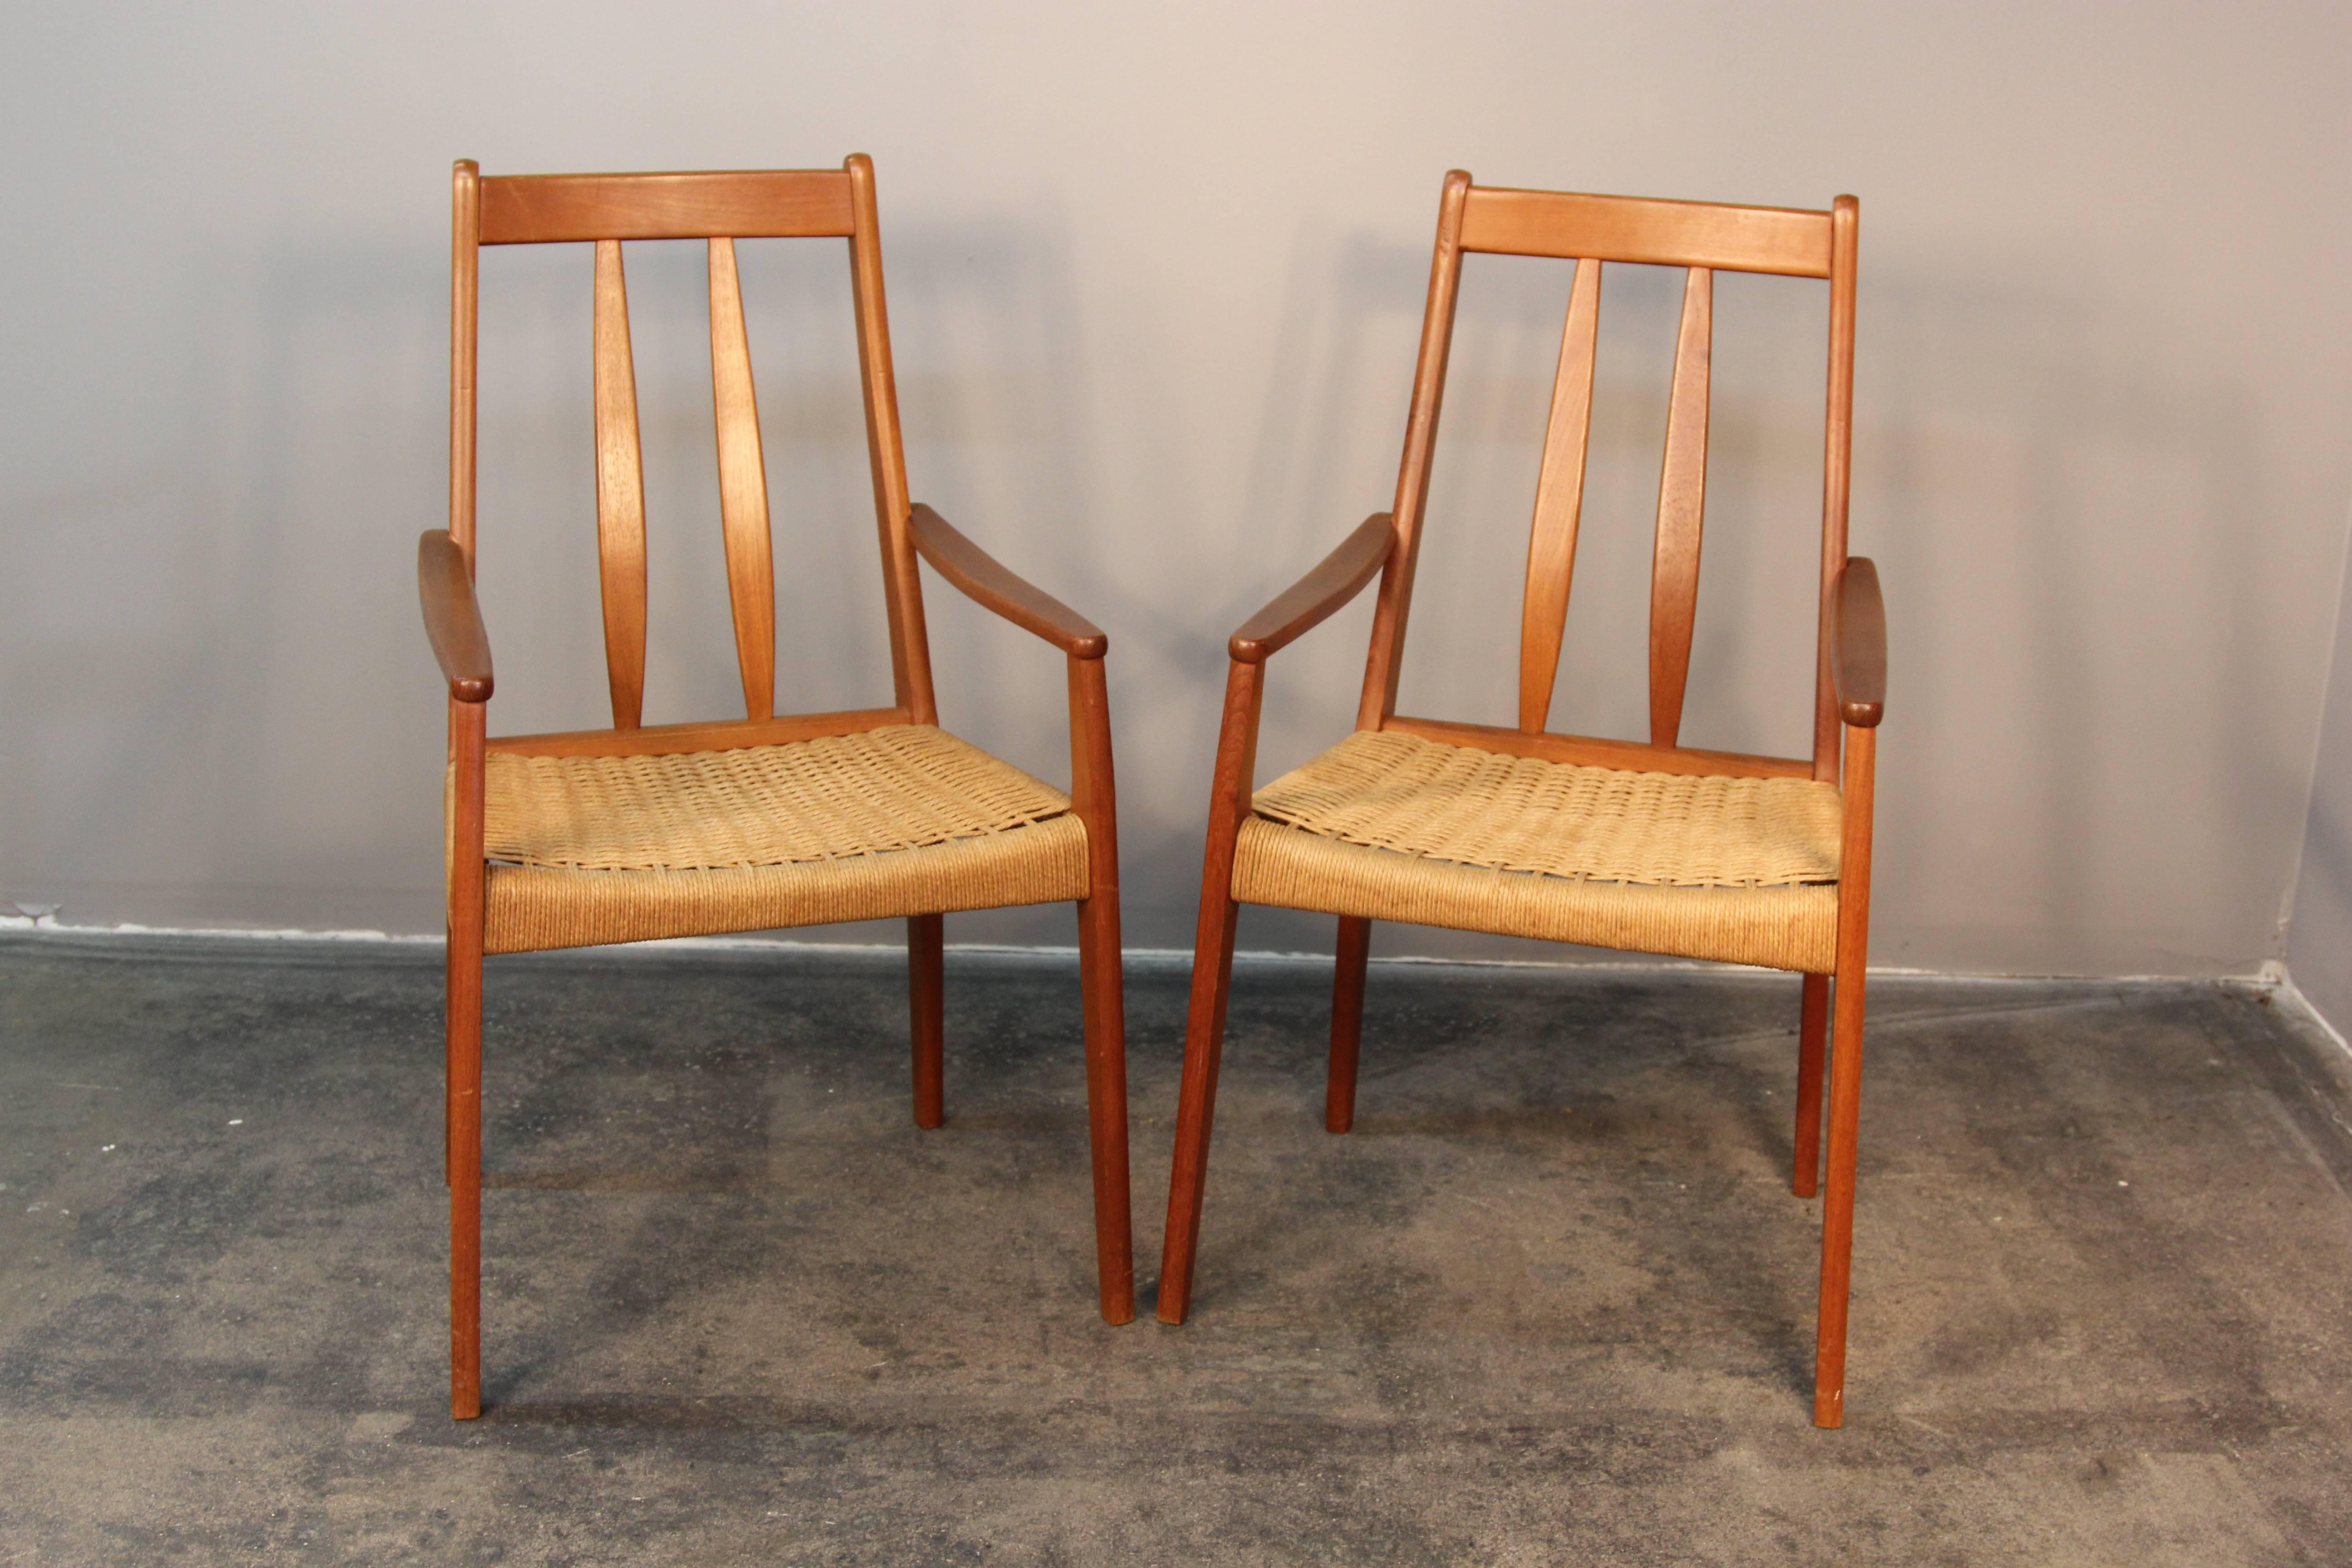 Excellent head of table dining chairs, or occasional chairs. Teak wood frame with Danish cord seats.